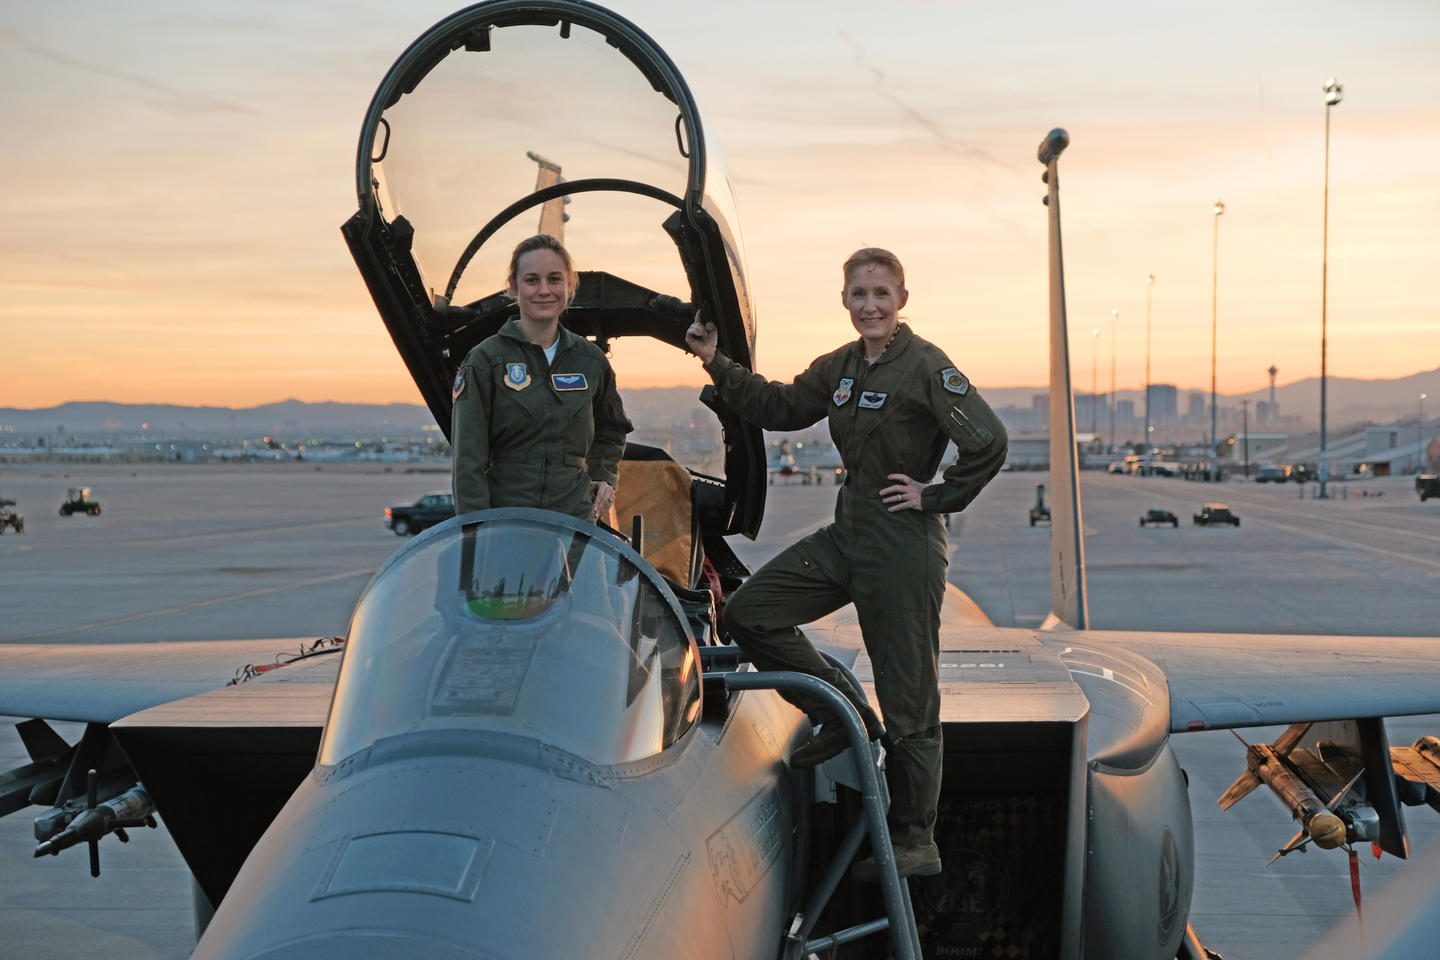 PHOTO: Brie Larson gets hands-on help from Brigadier General Jeannie Leavitt, 57th Wing Commander, on a trip to Nellis Air Force Base in Nevada to research her character, for the film, "Captain Marvel."